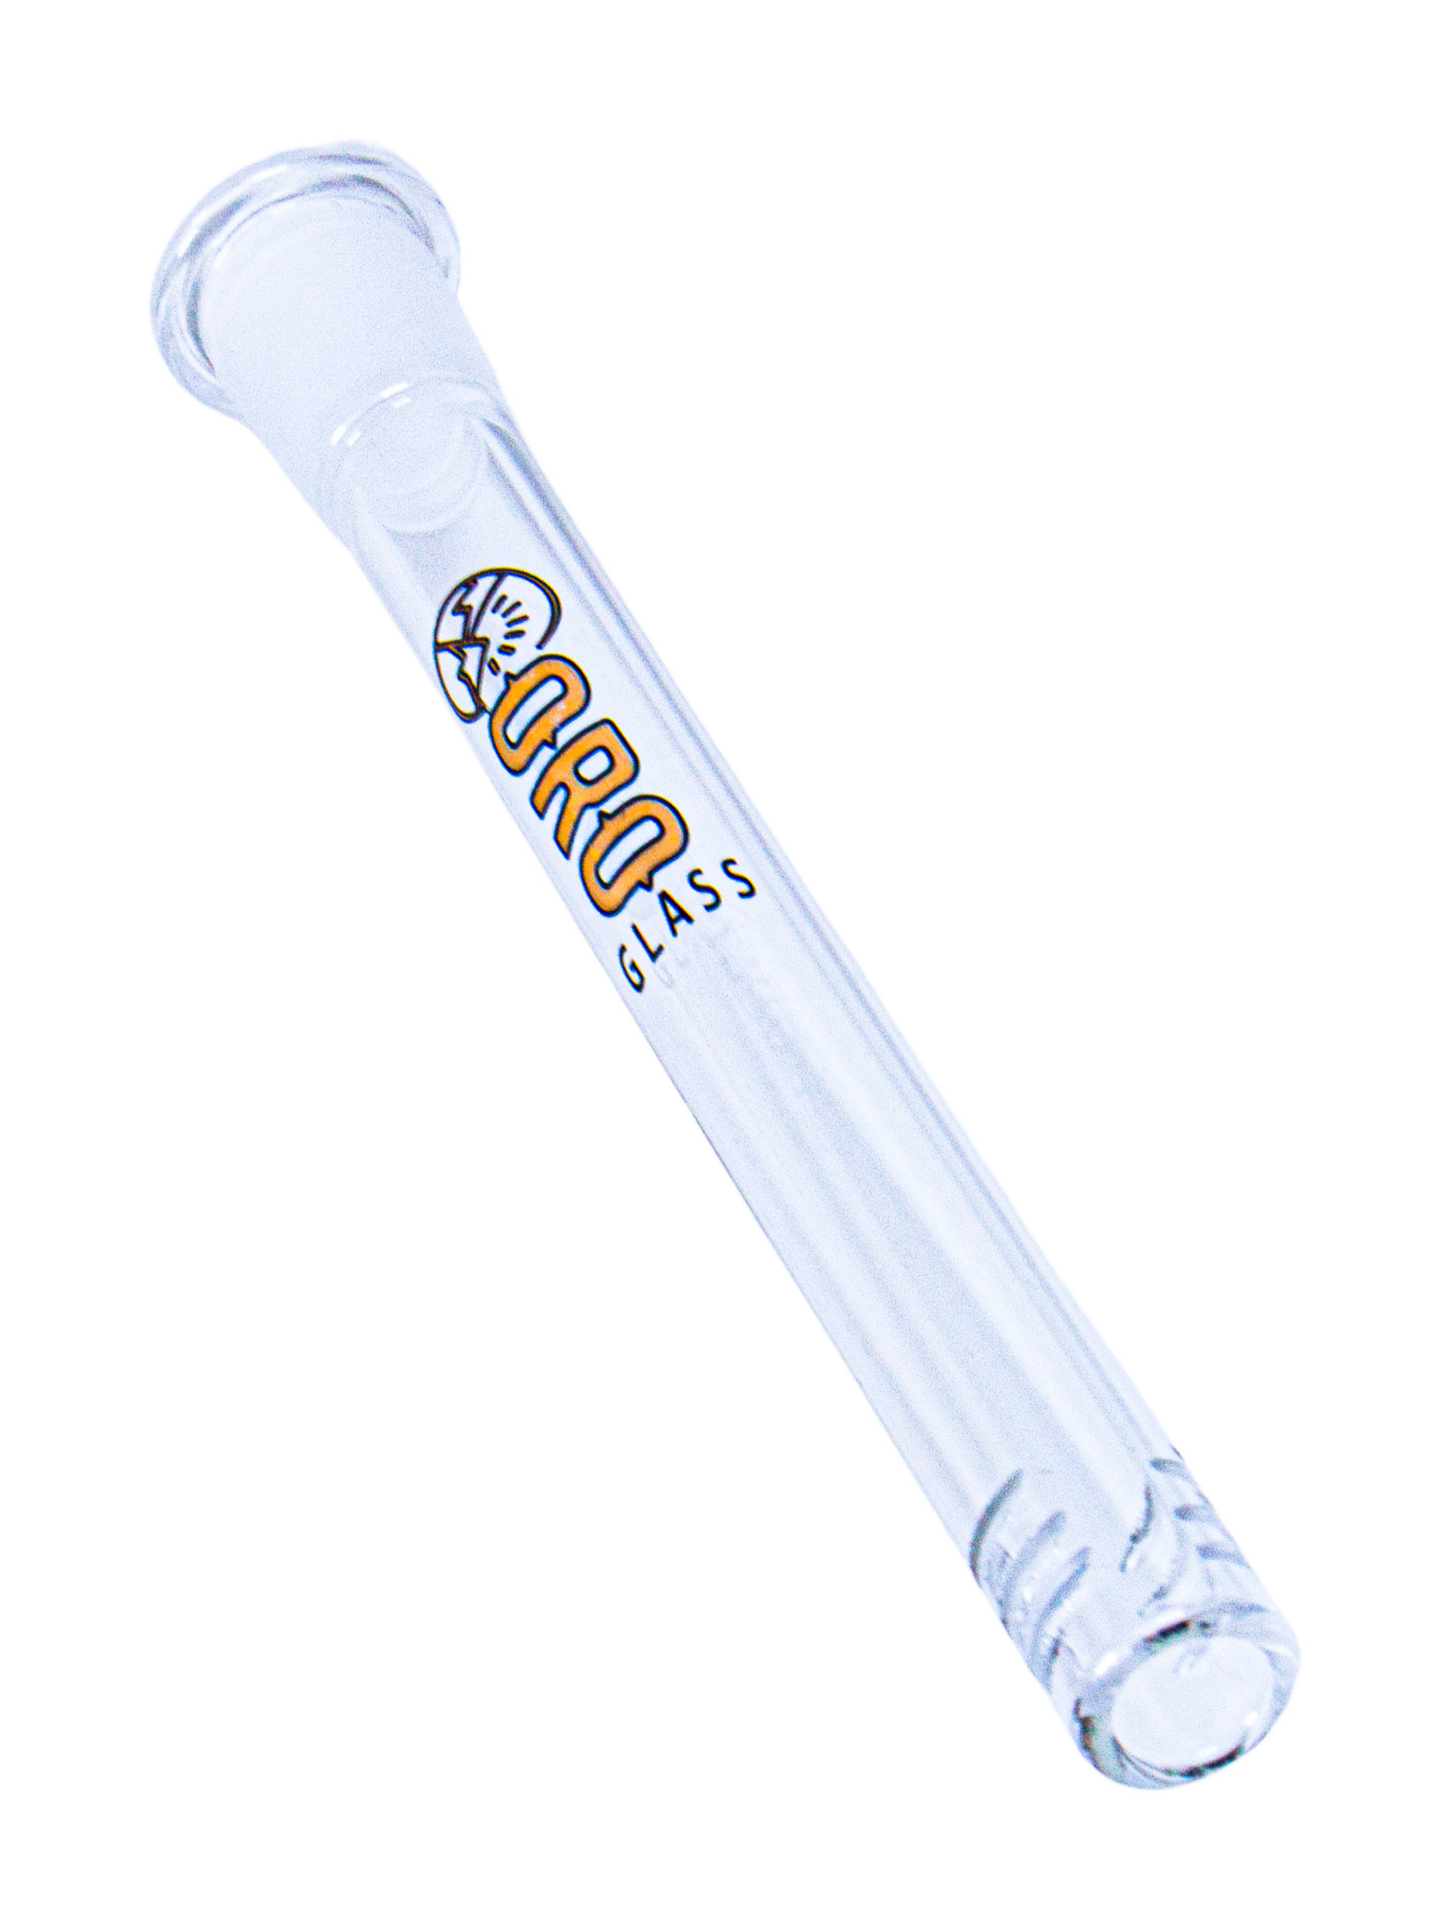 An Oro Glass Company 5.5-inch 18mm to 14mm Diffused Downstem.